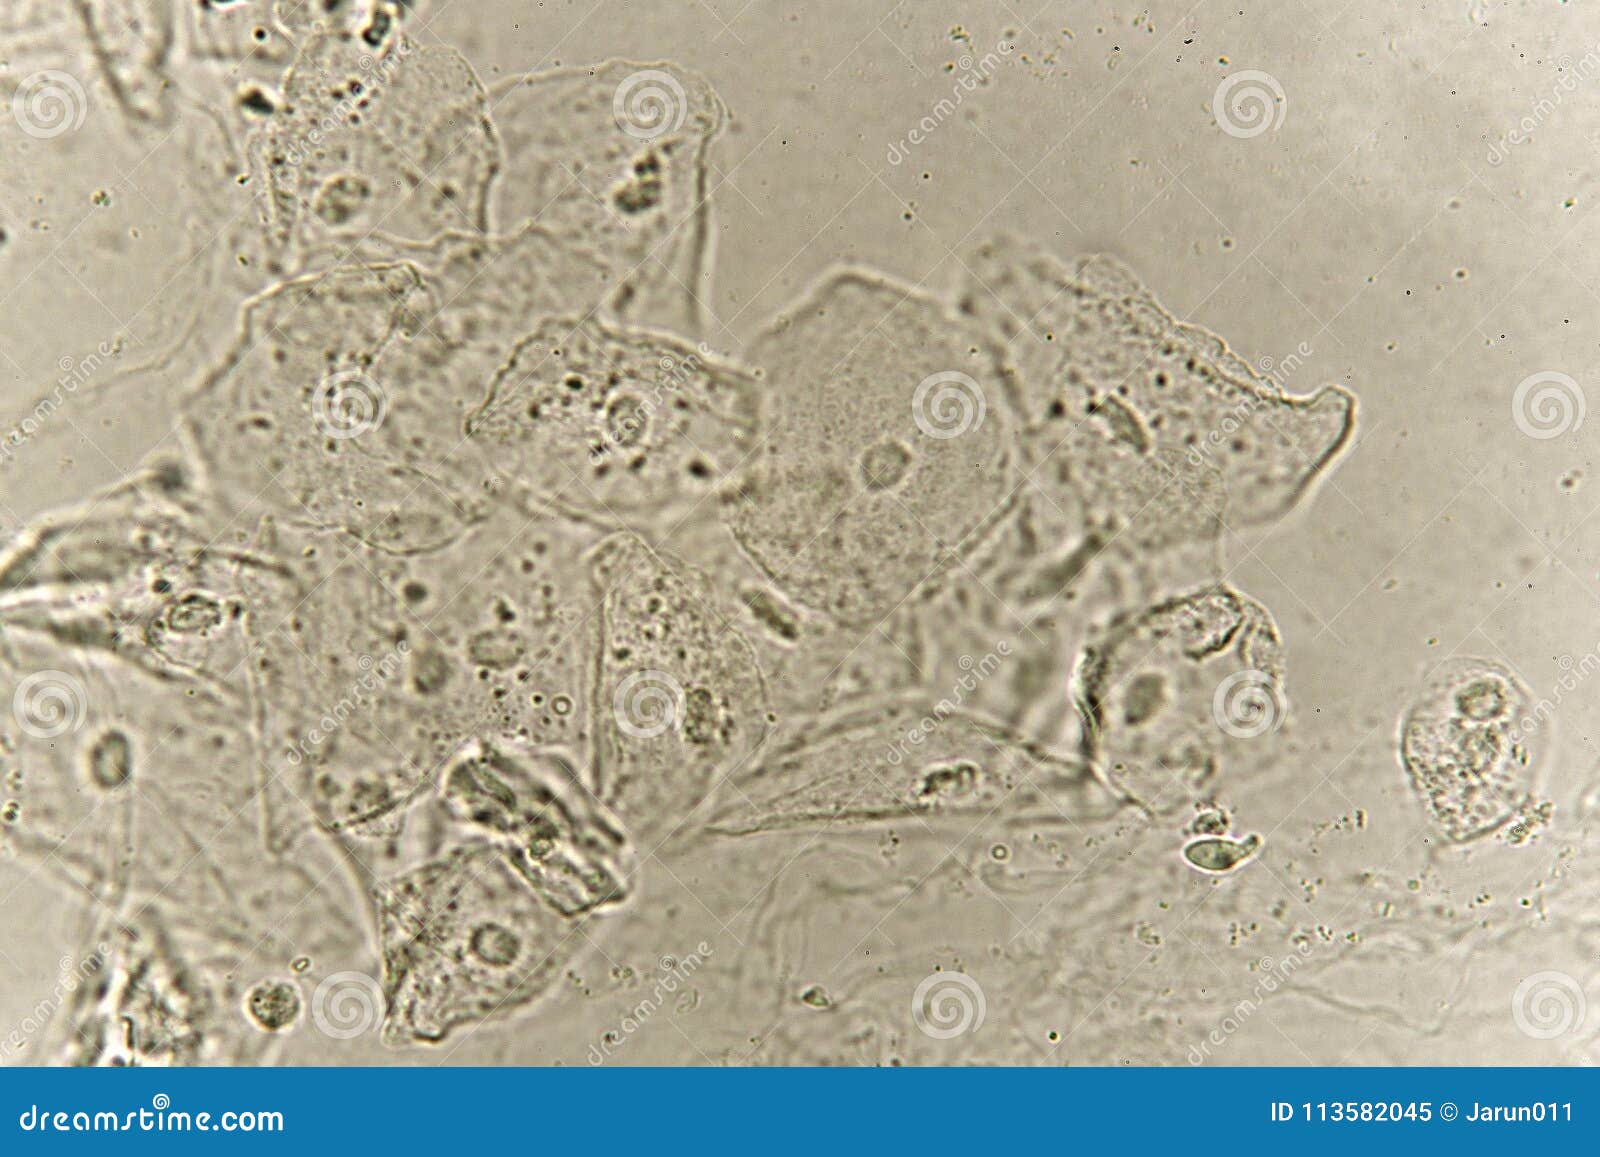 epithelial cells with bacteria in patient urine